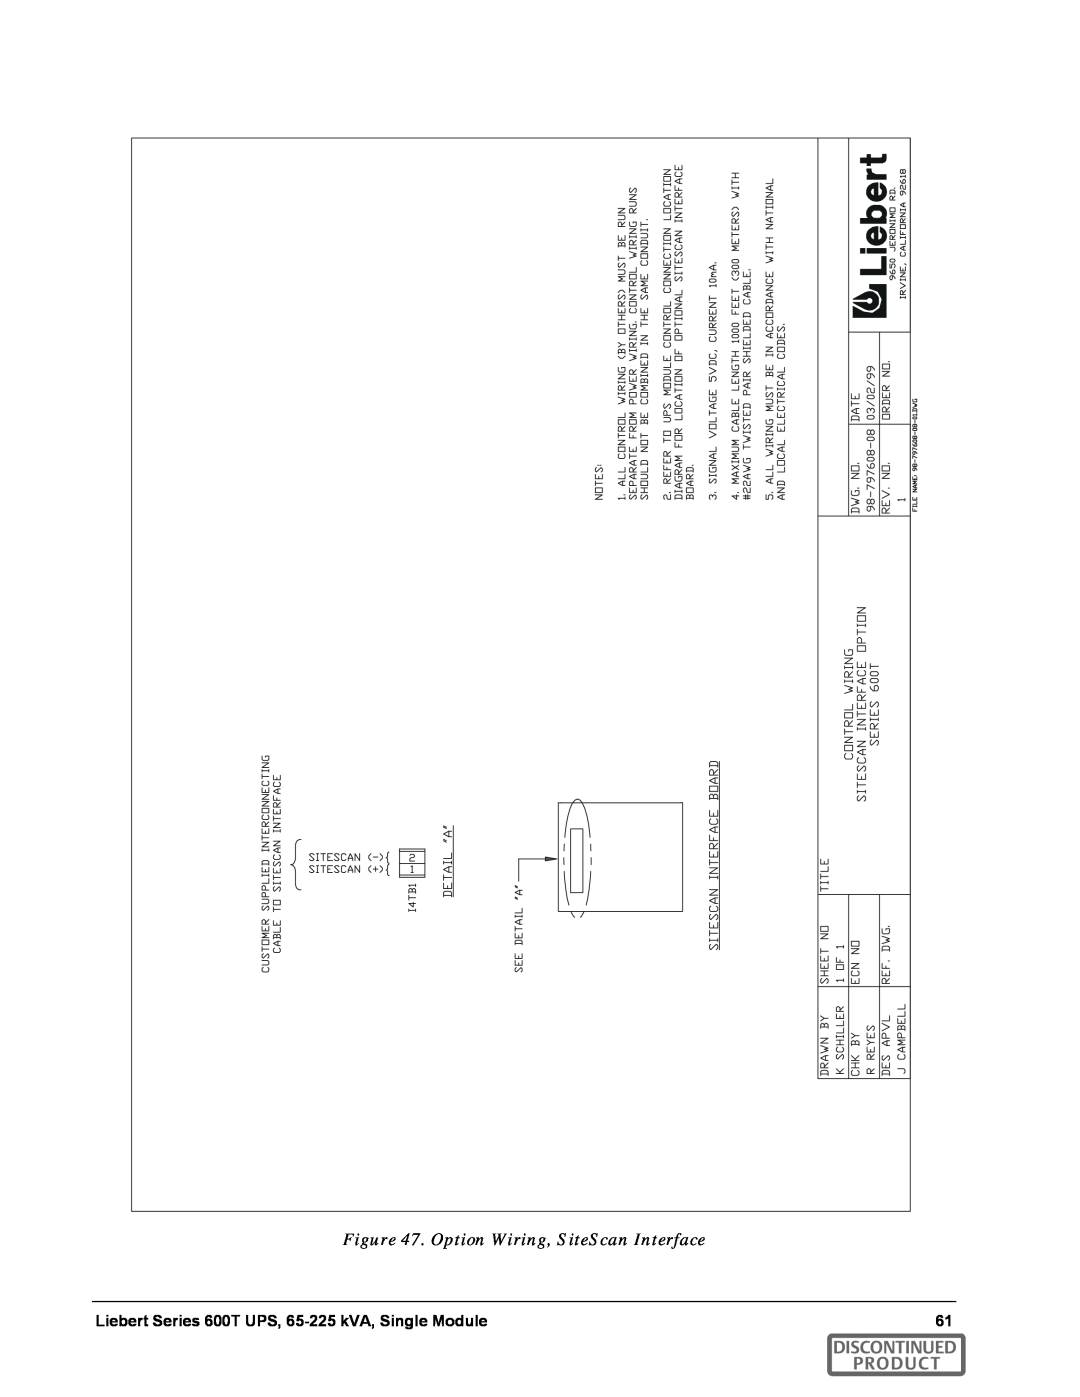 Emerson SERIES 600T manual Option Wiring, SiteScan Interface, Discontinued Product 